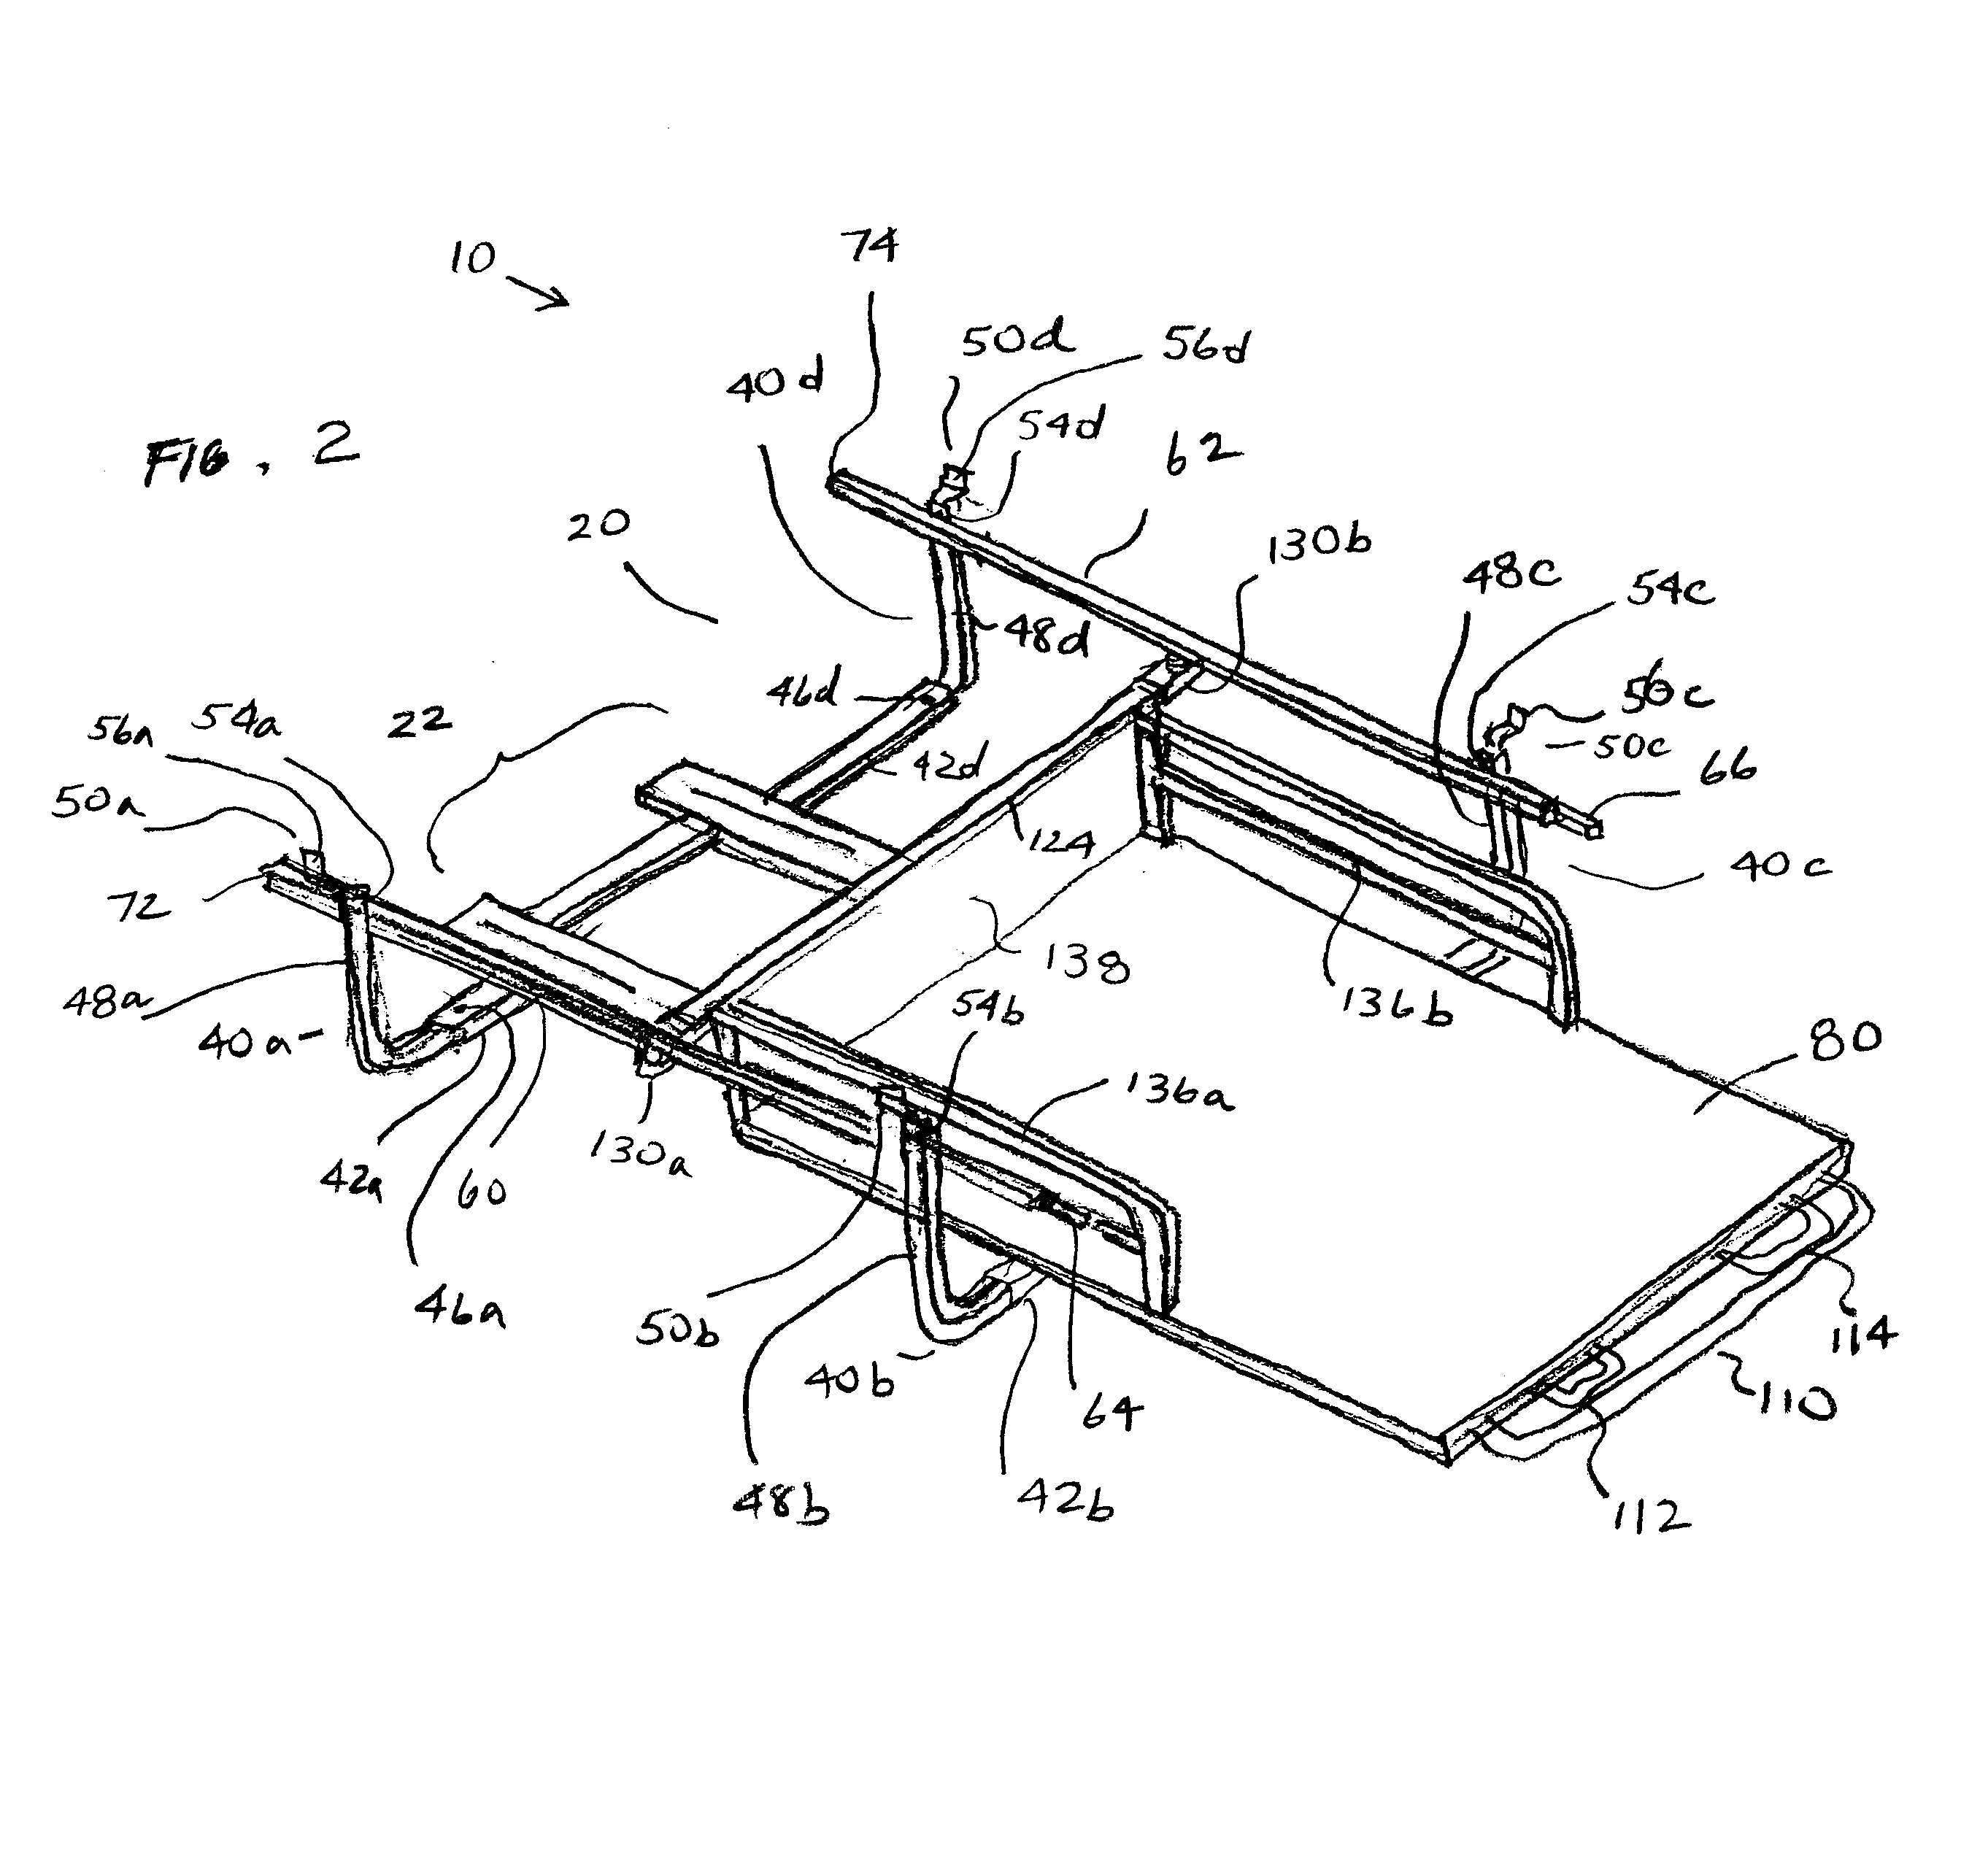 Pull-out load platform for truck cargo beds